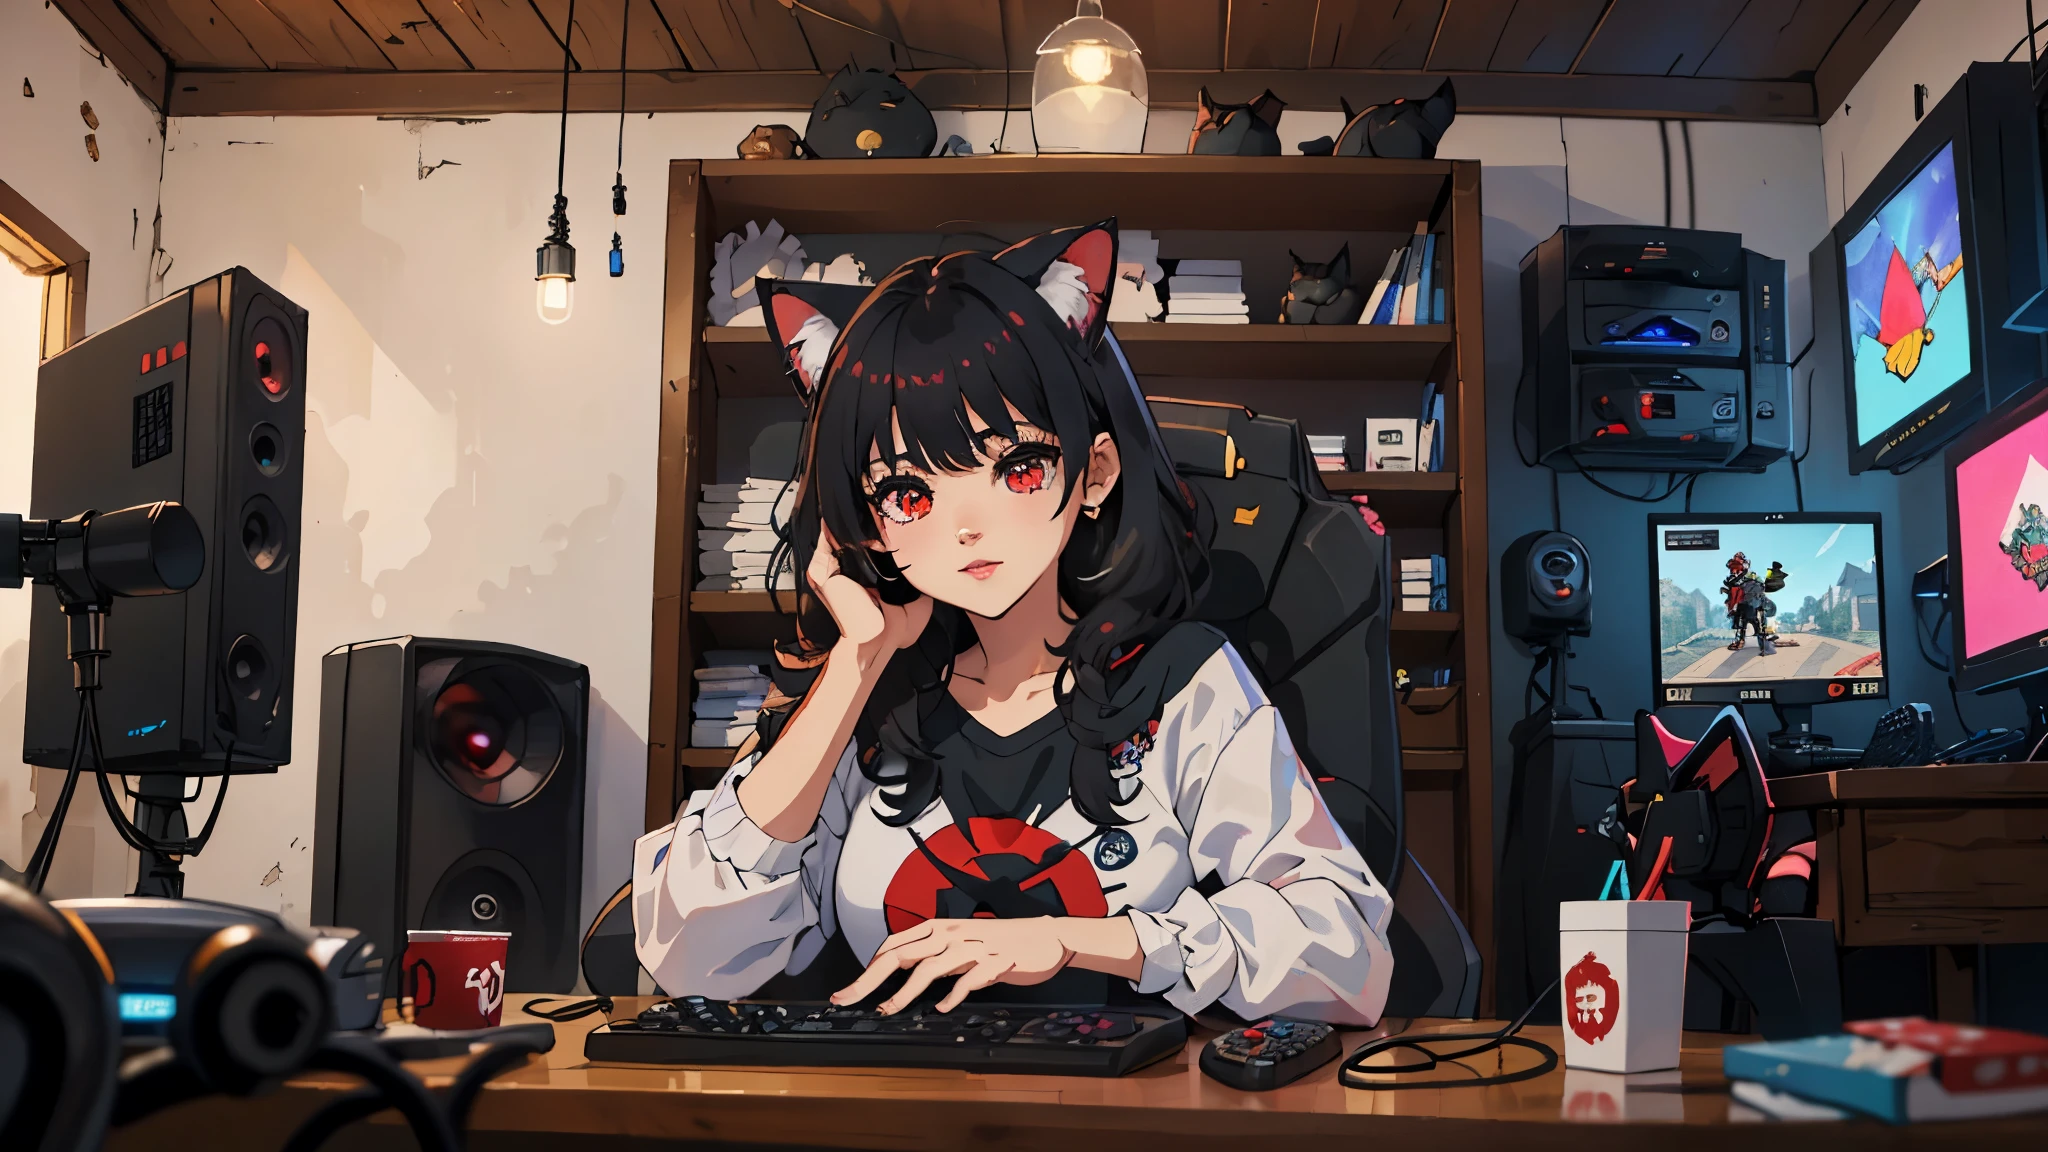 (junkotvv, black fur, fringe, ((cat ears)), Red eyes), in the foreground a villager is using a gaming computer inside a peasant house,peasants wearing renaissance clothing,Dur3r Style,(gaming computer monitor, keyboard (computer), cables, rgb games),horses,castle in the distance,(cat ears)